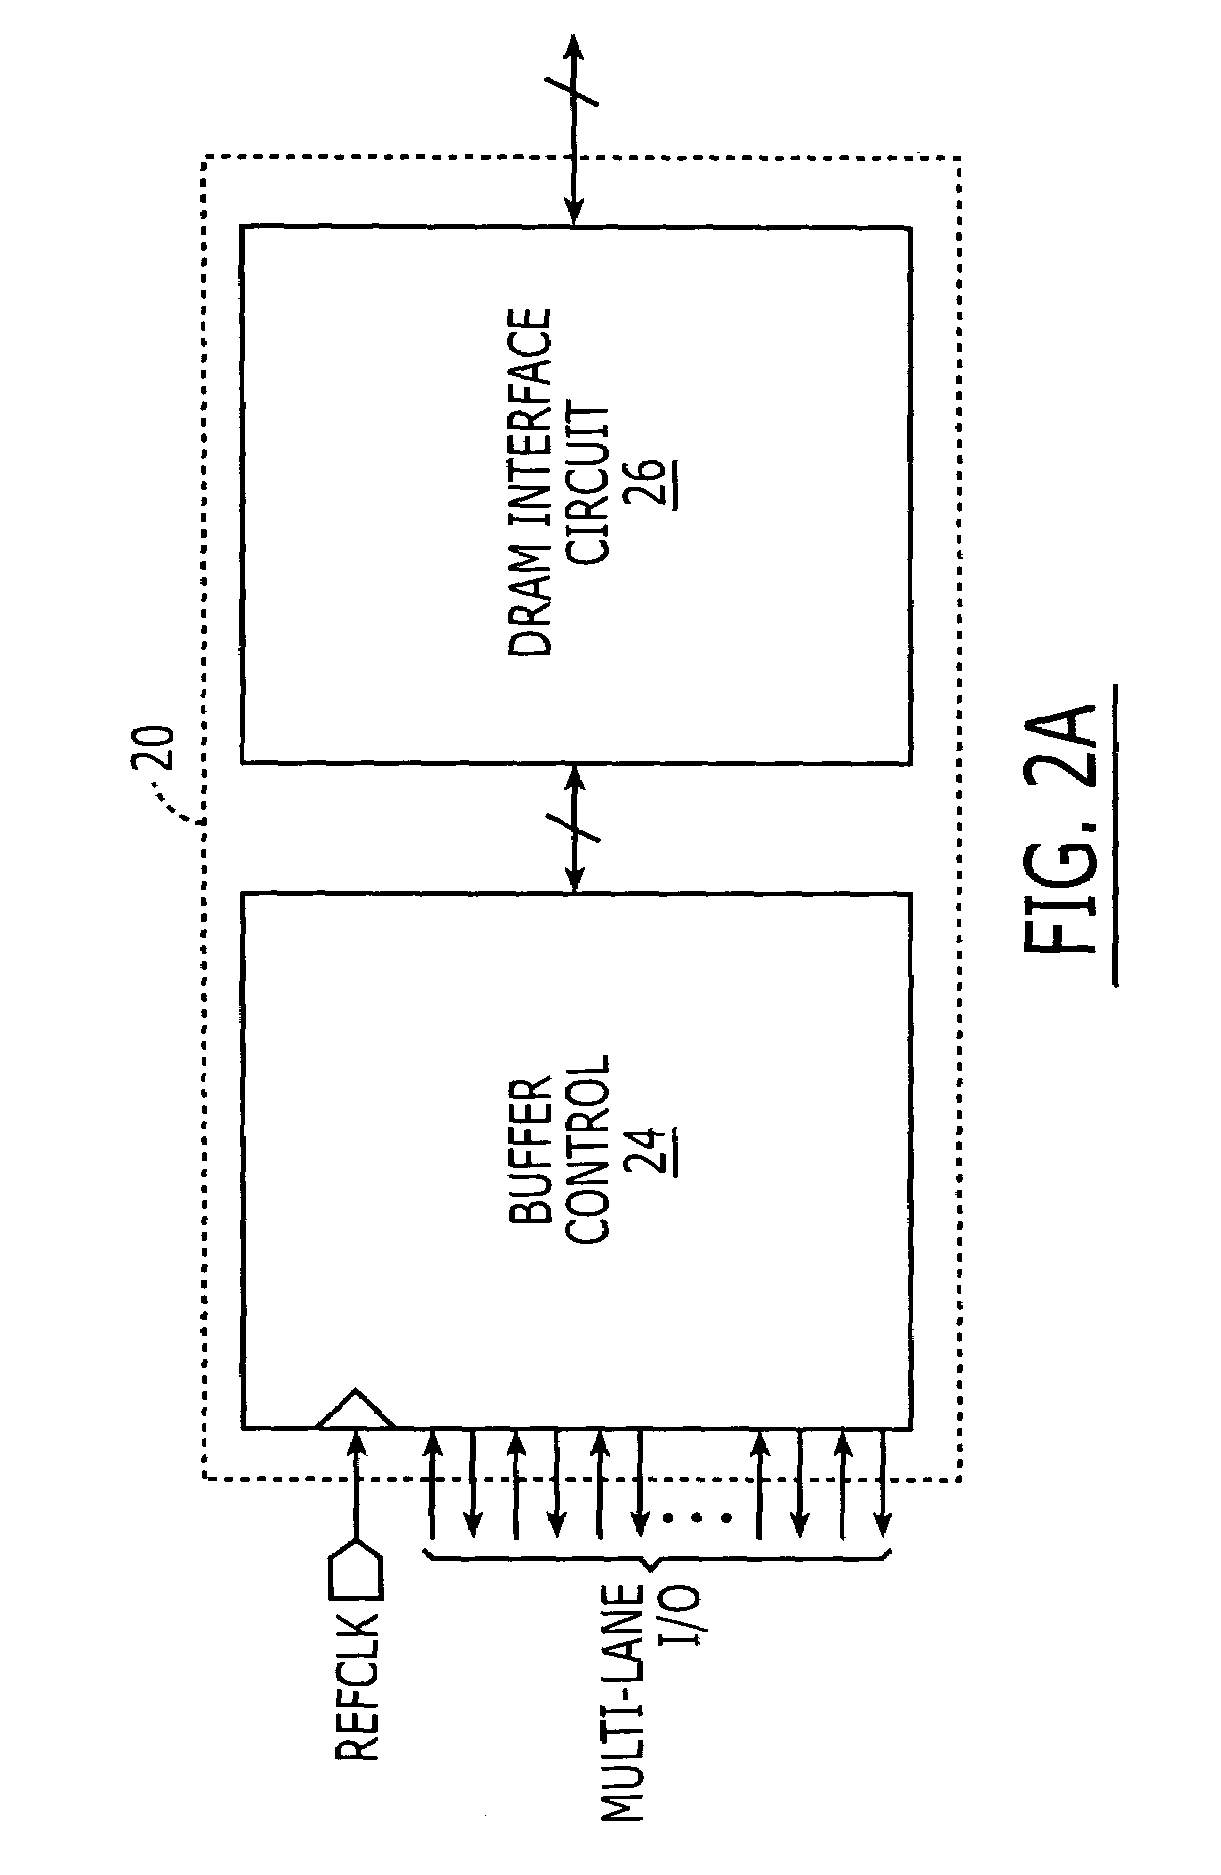 DRAM interface circuits having enhanced skew, slew rate and impedance control